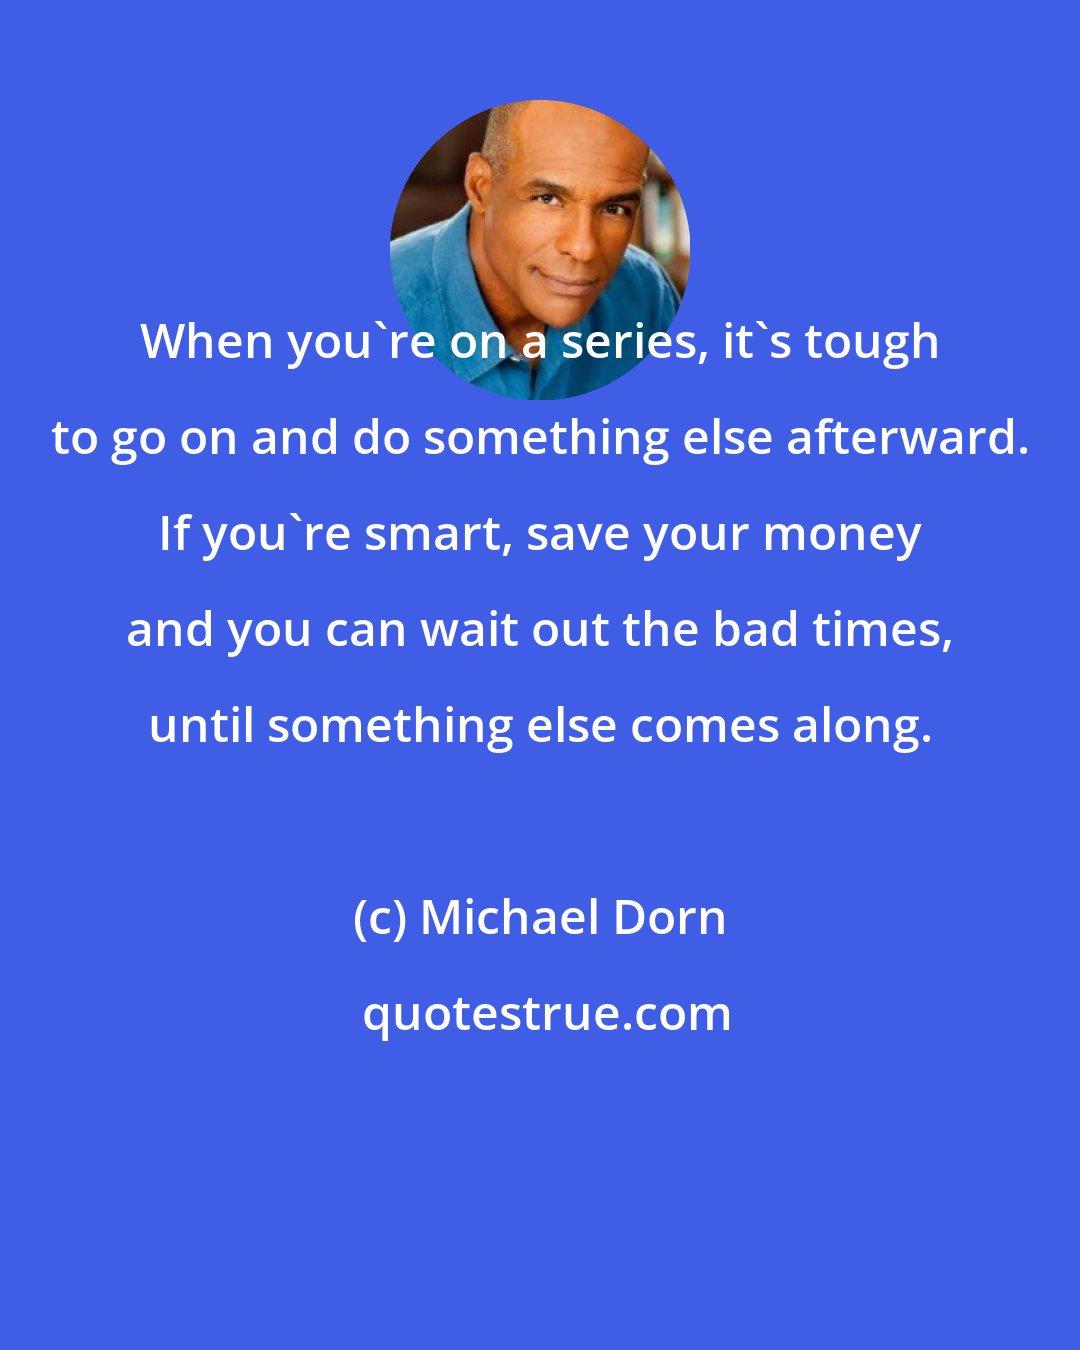 Michael Dorn: When you're on a series, it's tough to go on and do something else afterward. If you're smart, save your money and you can wait out the bad times, until something else comes along.